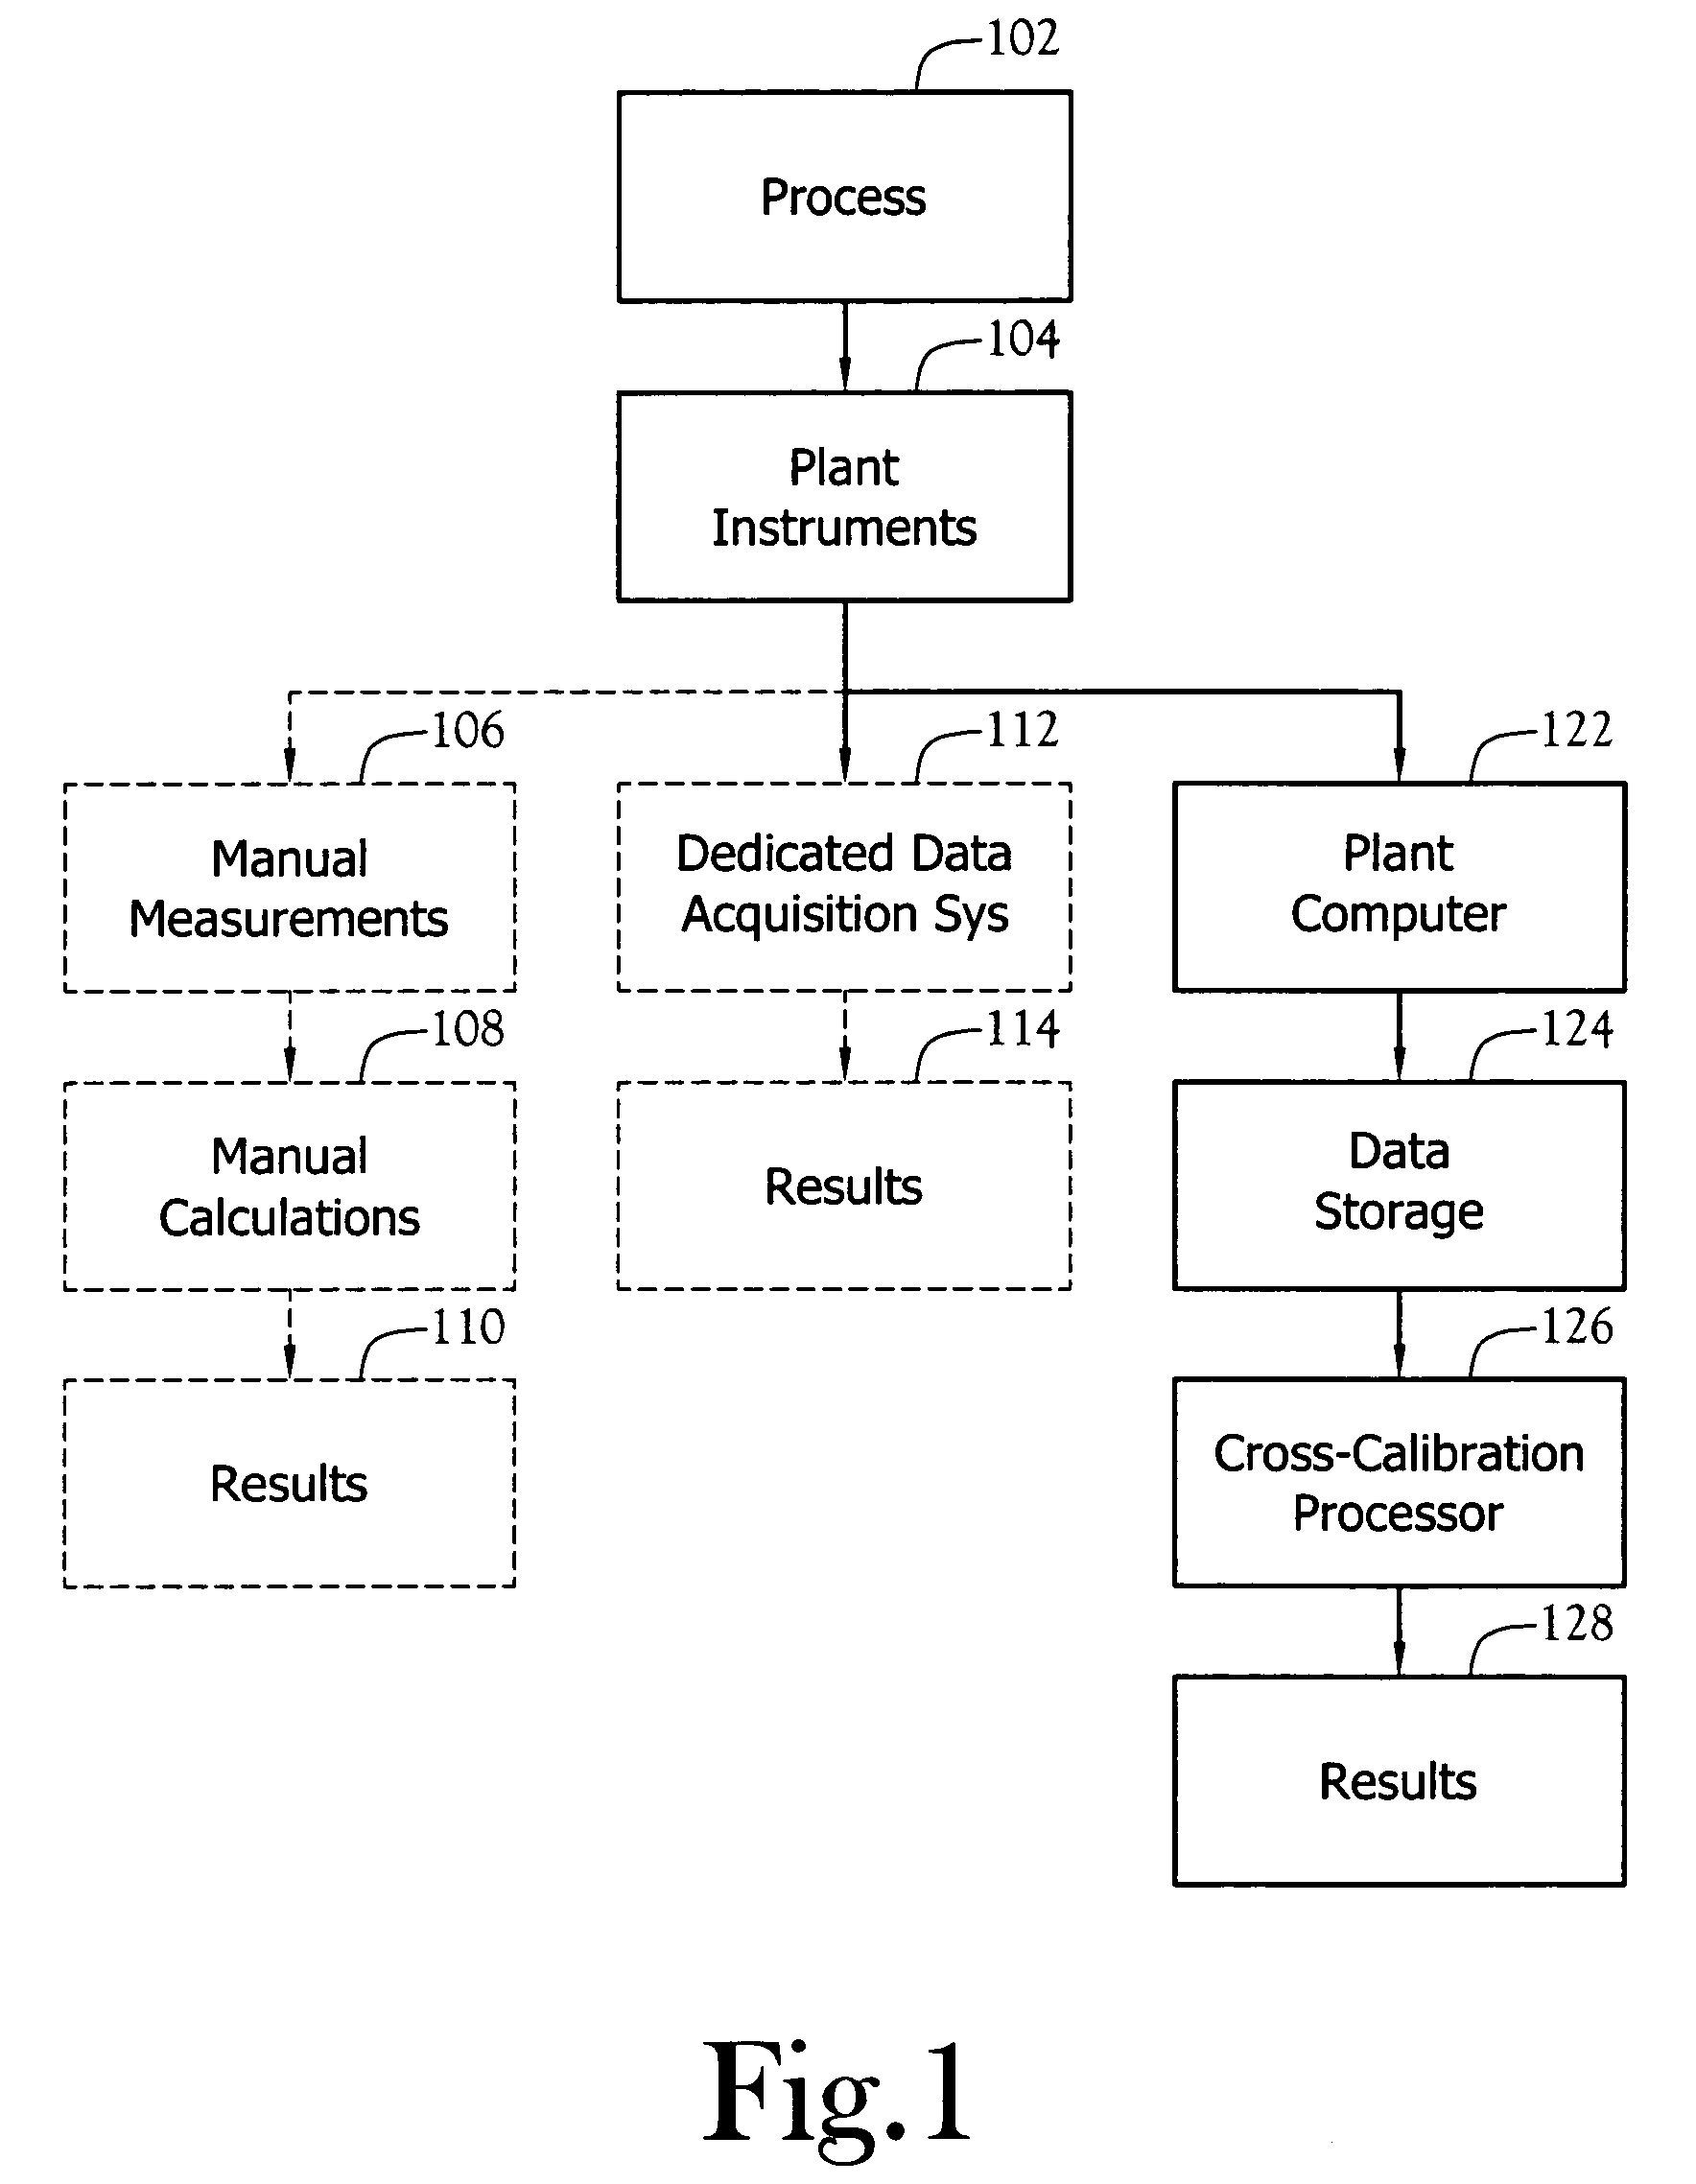 Cross-calibration of plant instruments with computer data